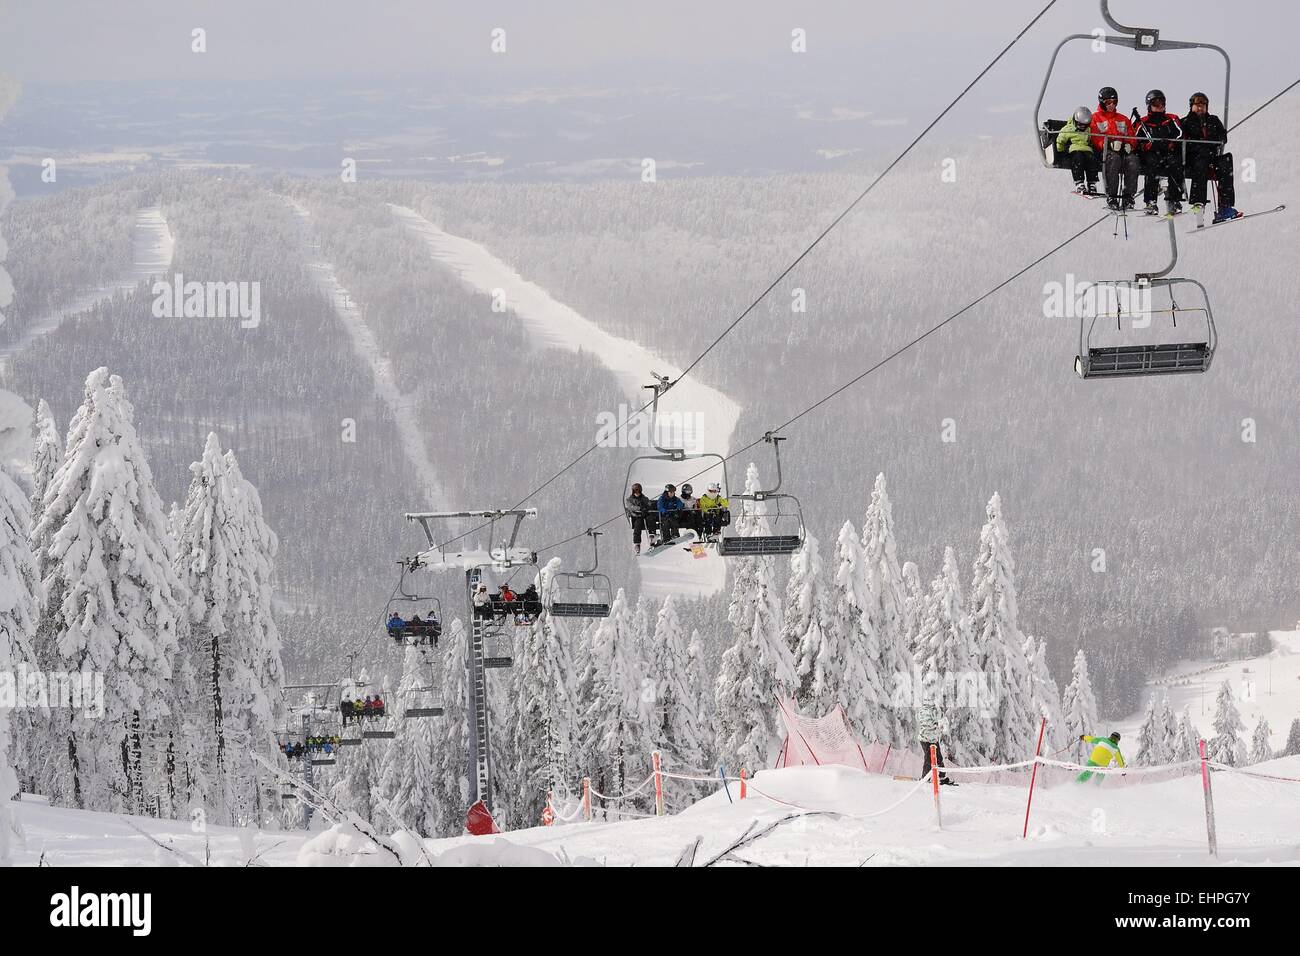 Chairlift in full operation Stock Photo